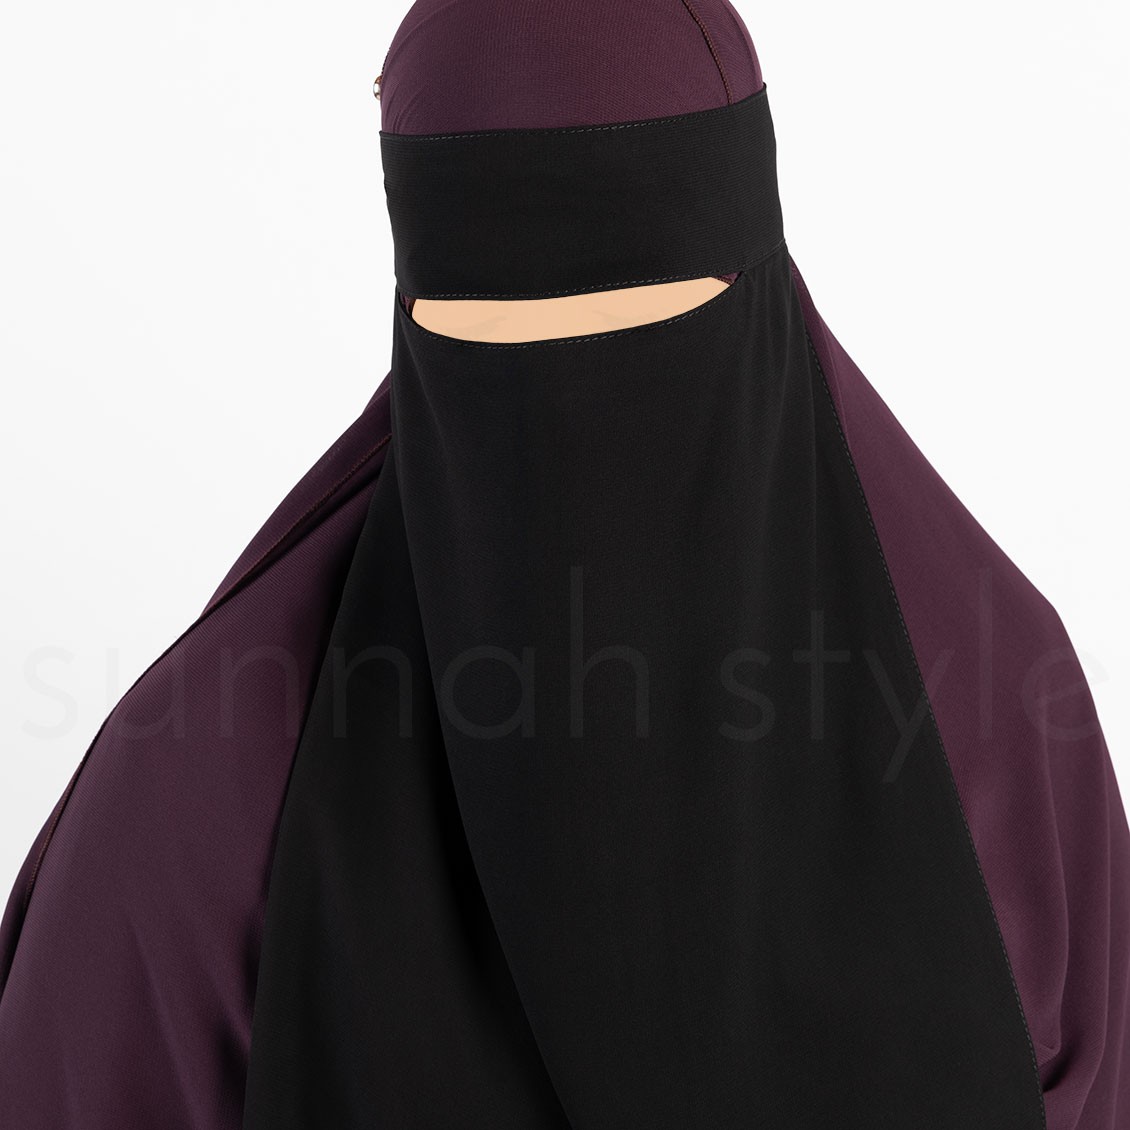 Sunnah Style Long One Layer Niqab Black